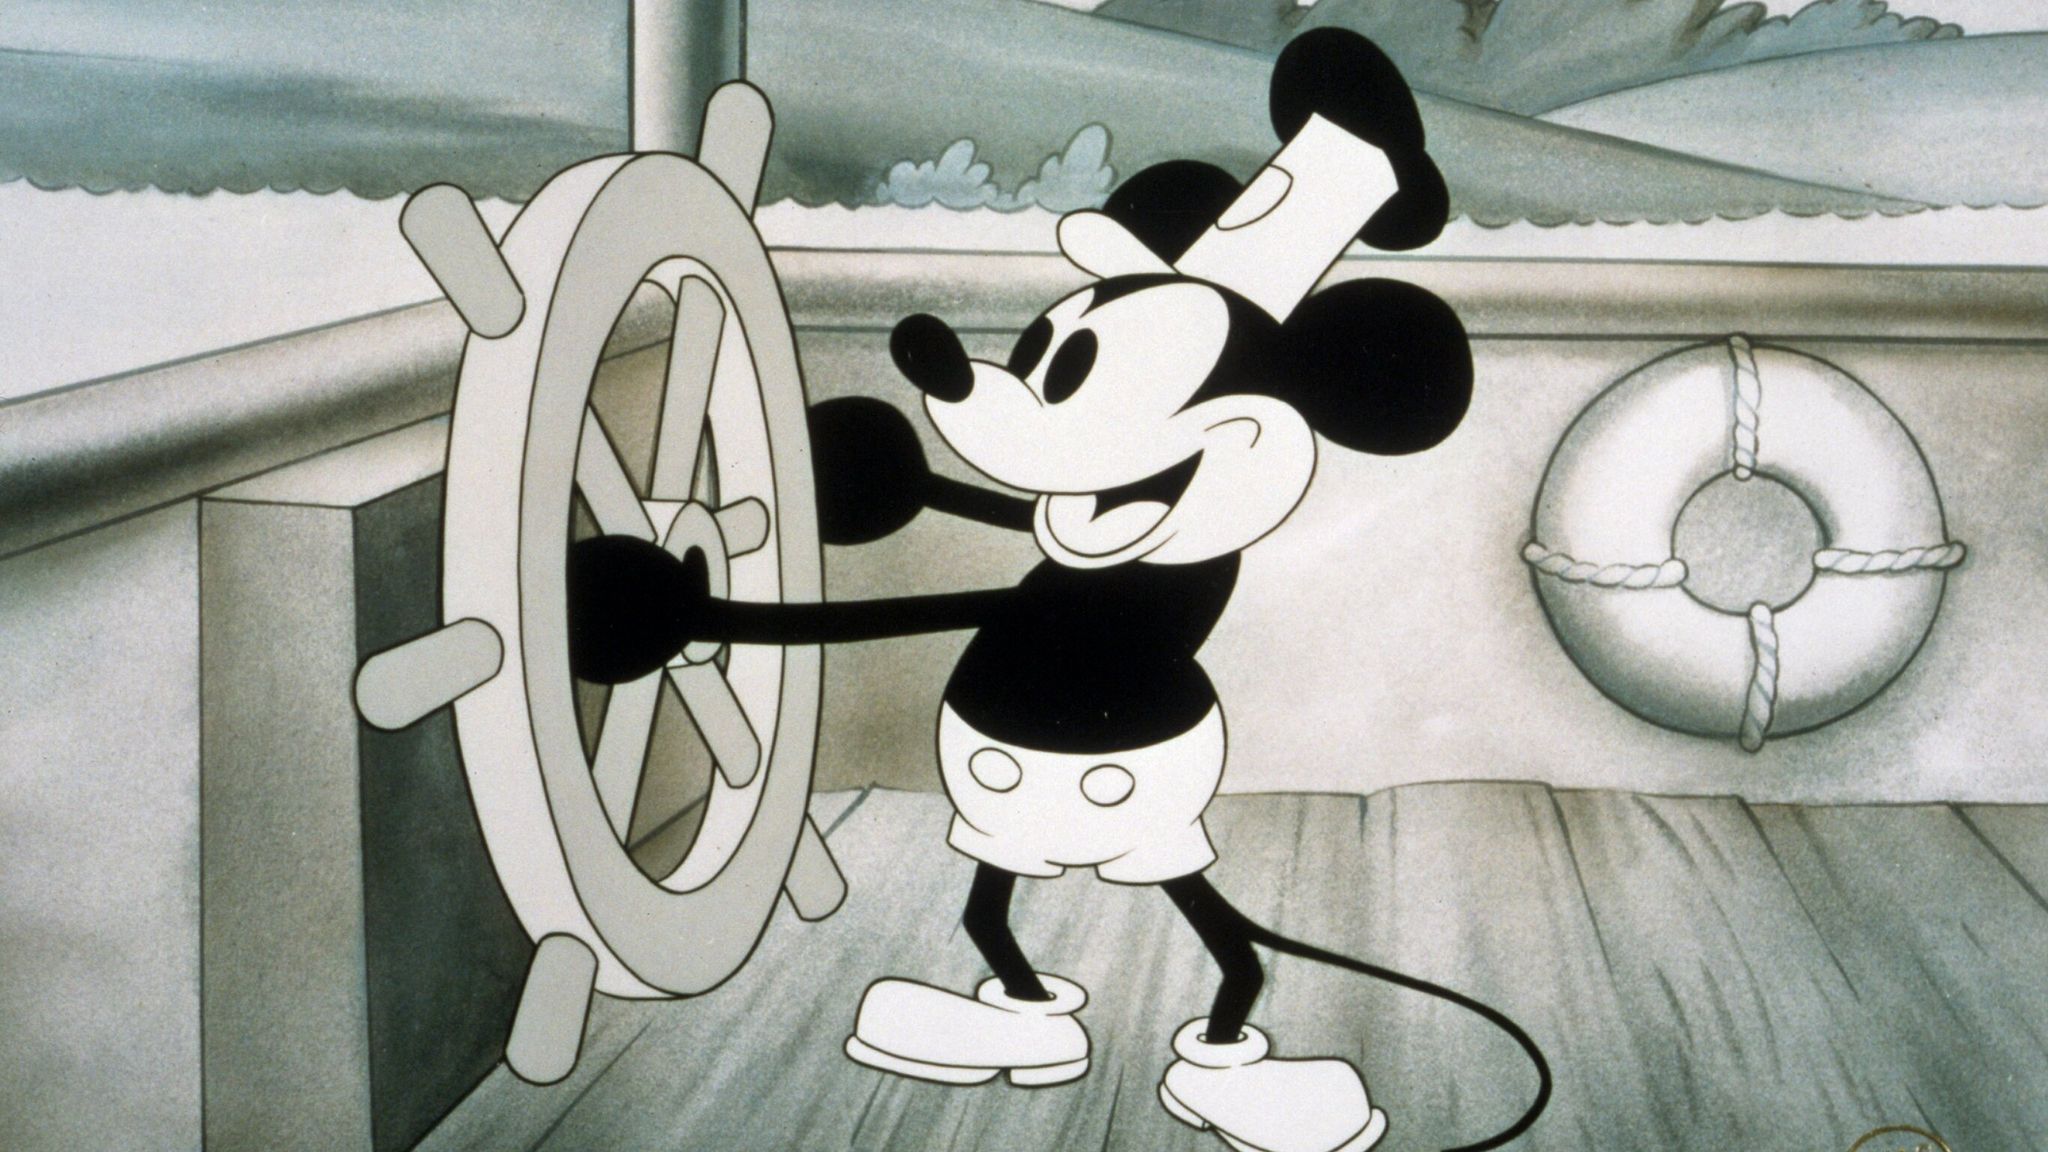 Steamboat Willie': An early version of Mickey Mouse is now in the public  domain